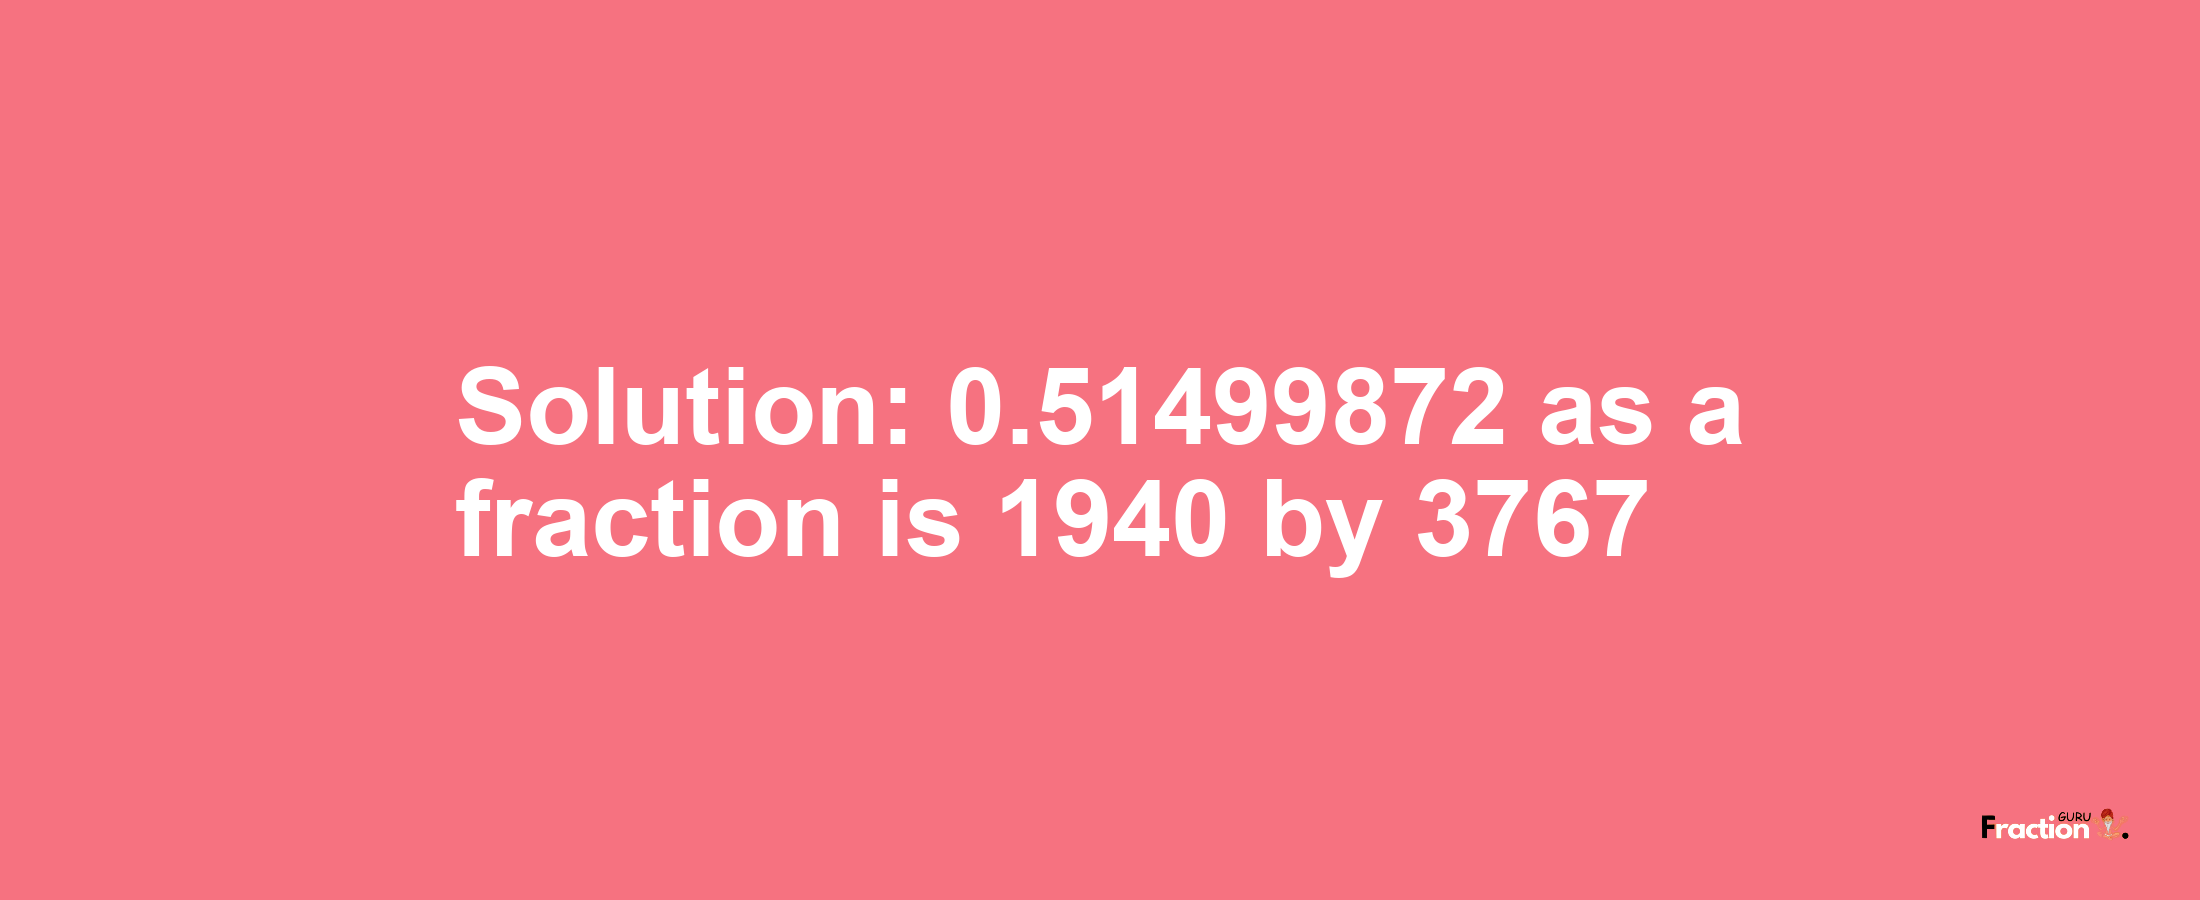 Solution:0.51499872 as a fraction is 1940/3767